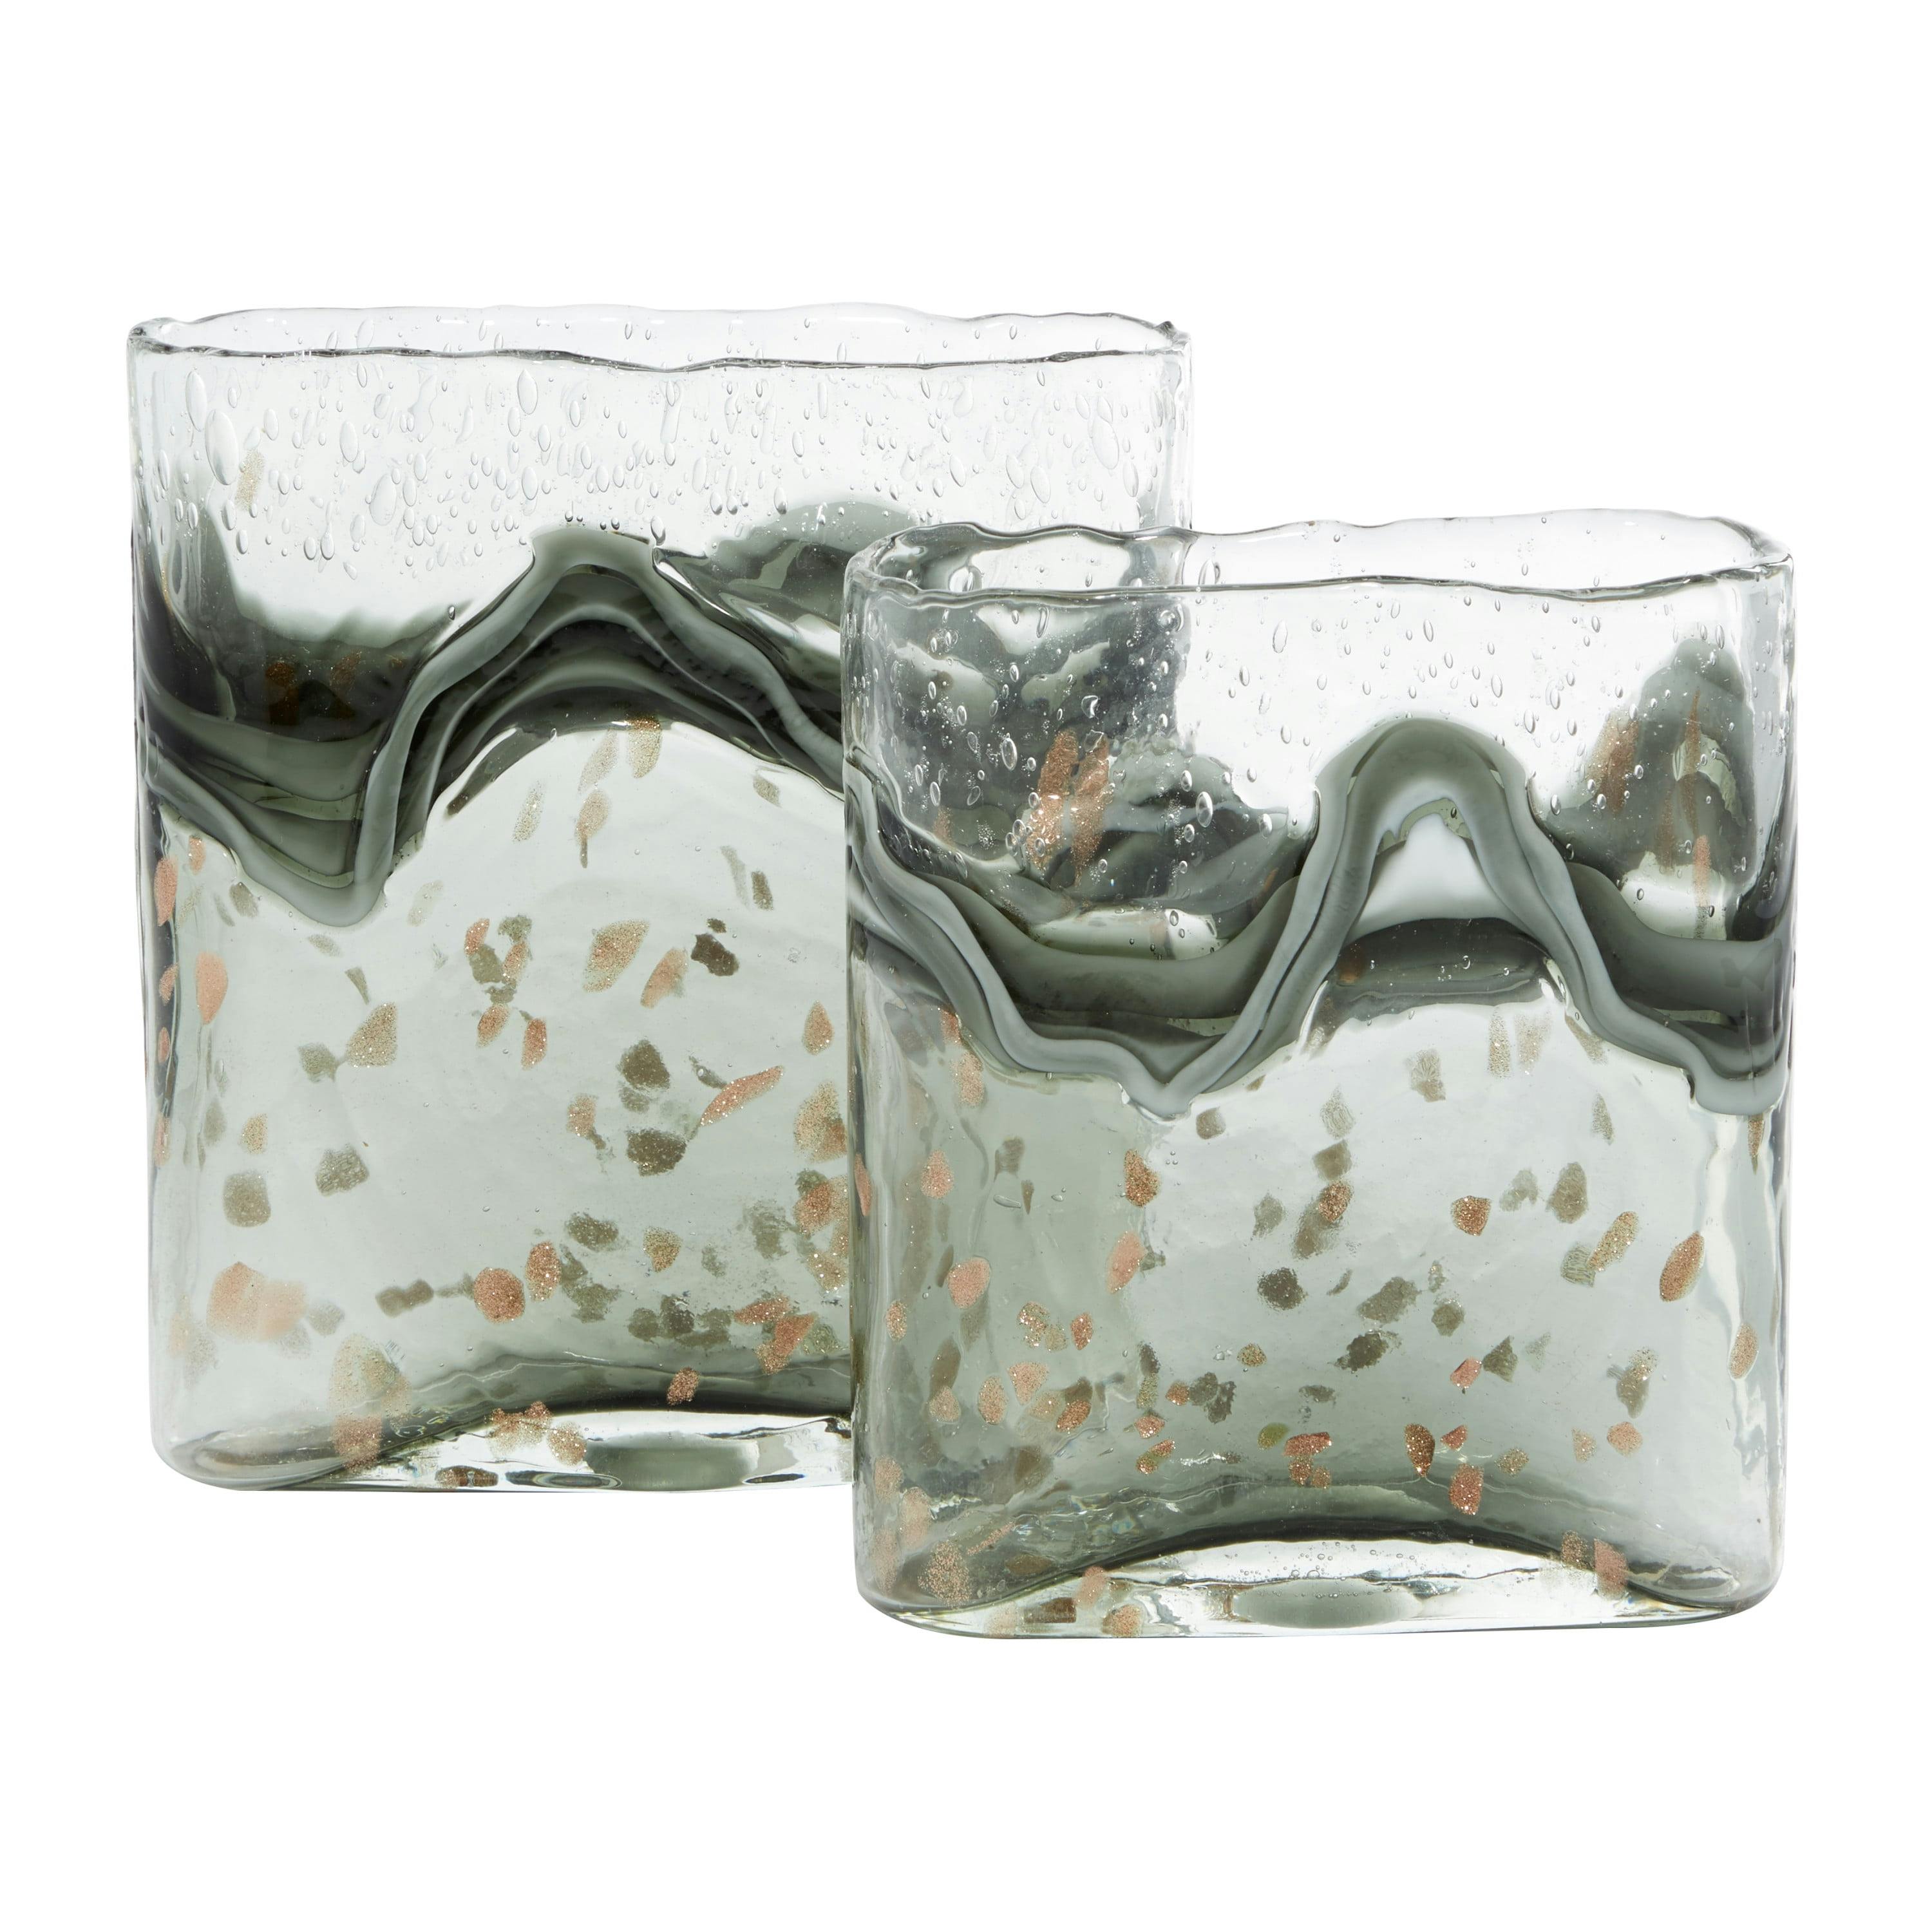 Elegant Gray Glass Vase Duo with Speckled Wave Design